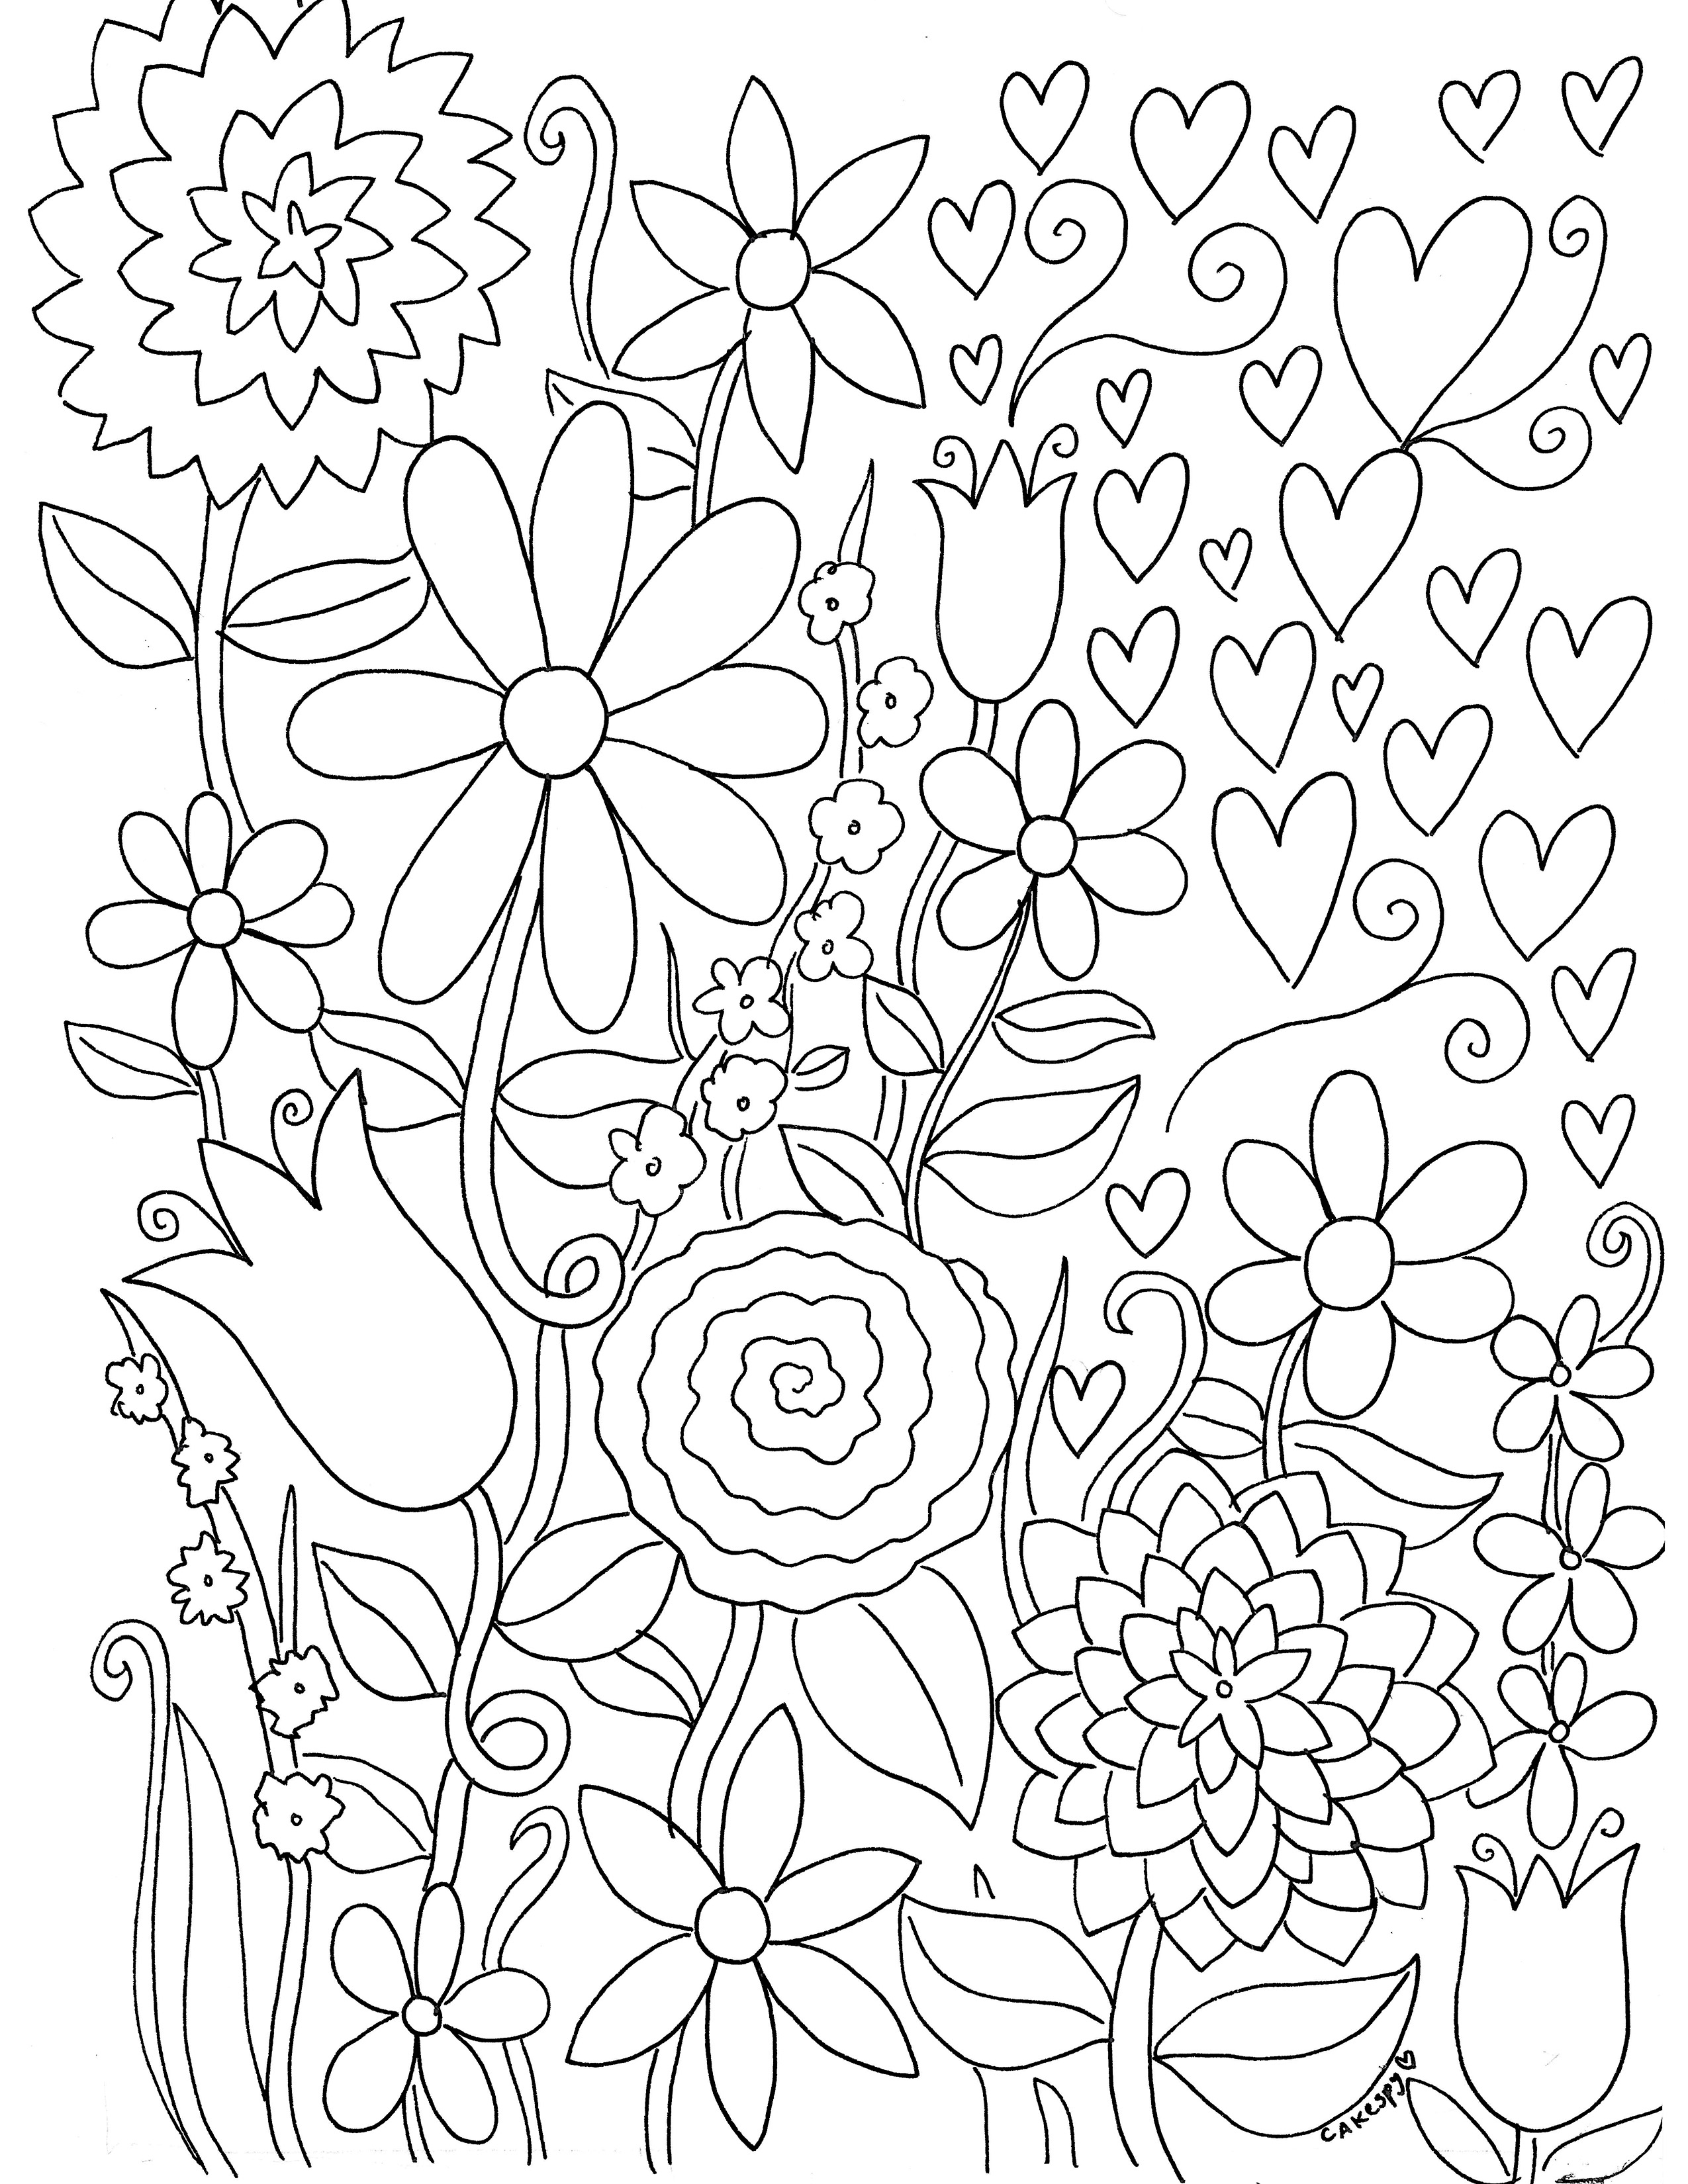 Free Stress Relief Coloring Pages at Free printable